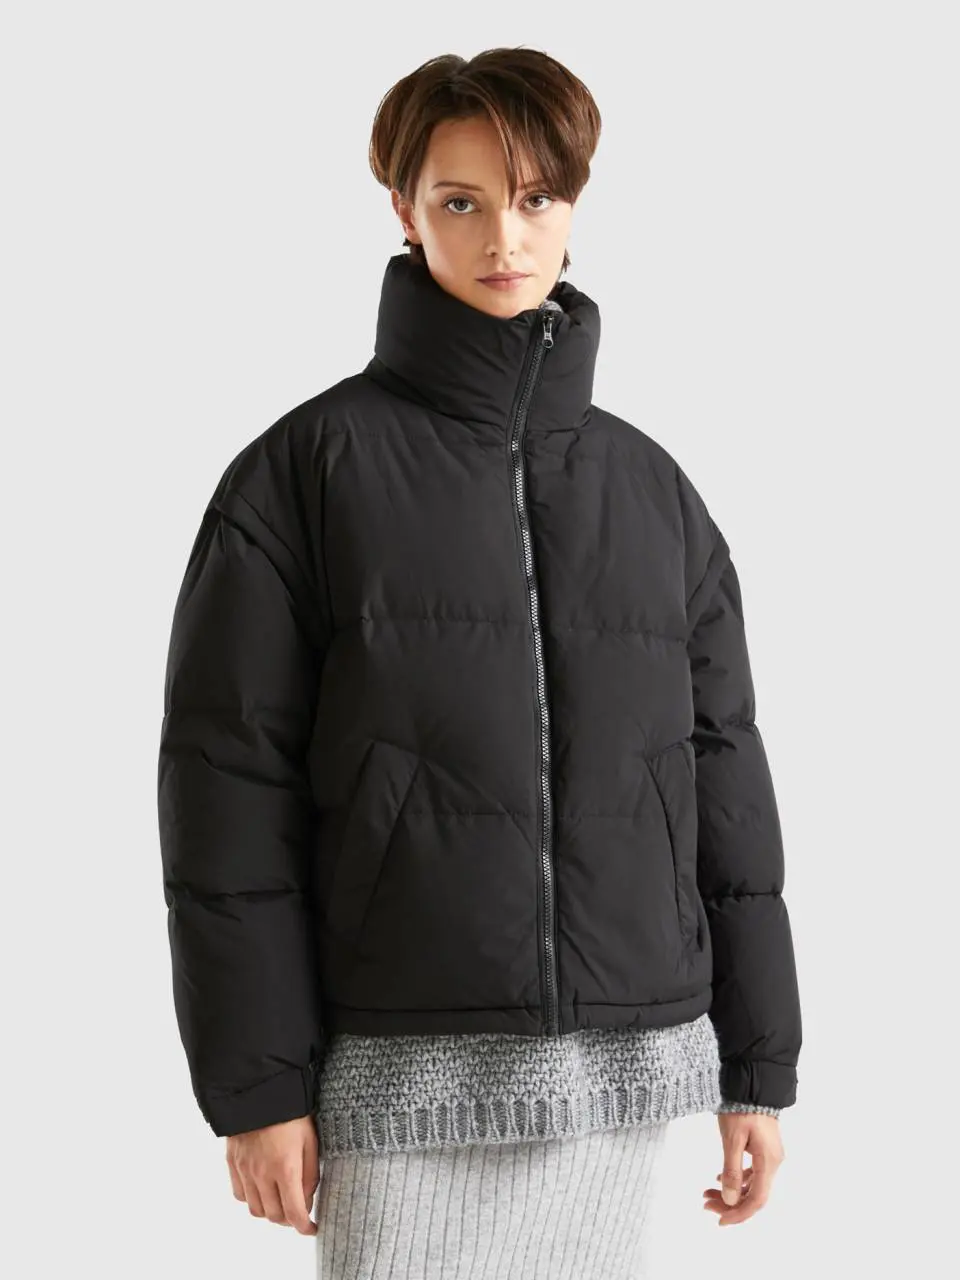 Benetton short padded jacket with removable sleeves. 1